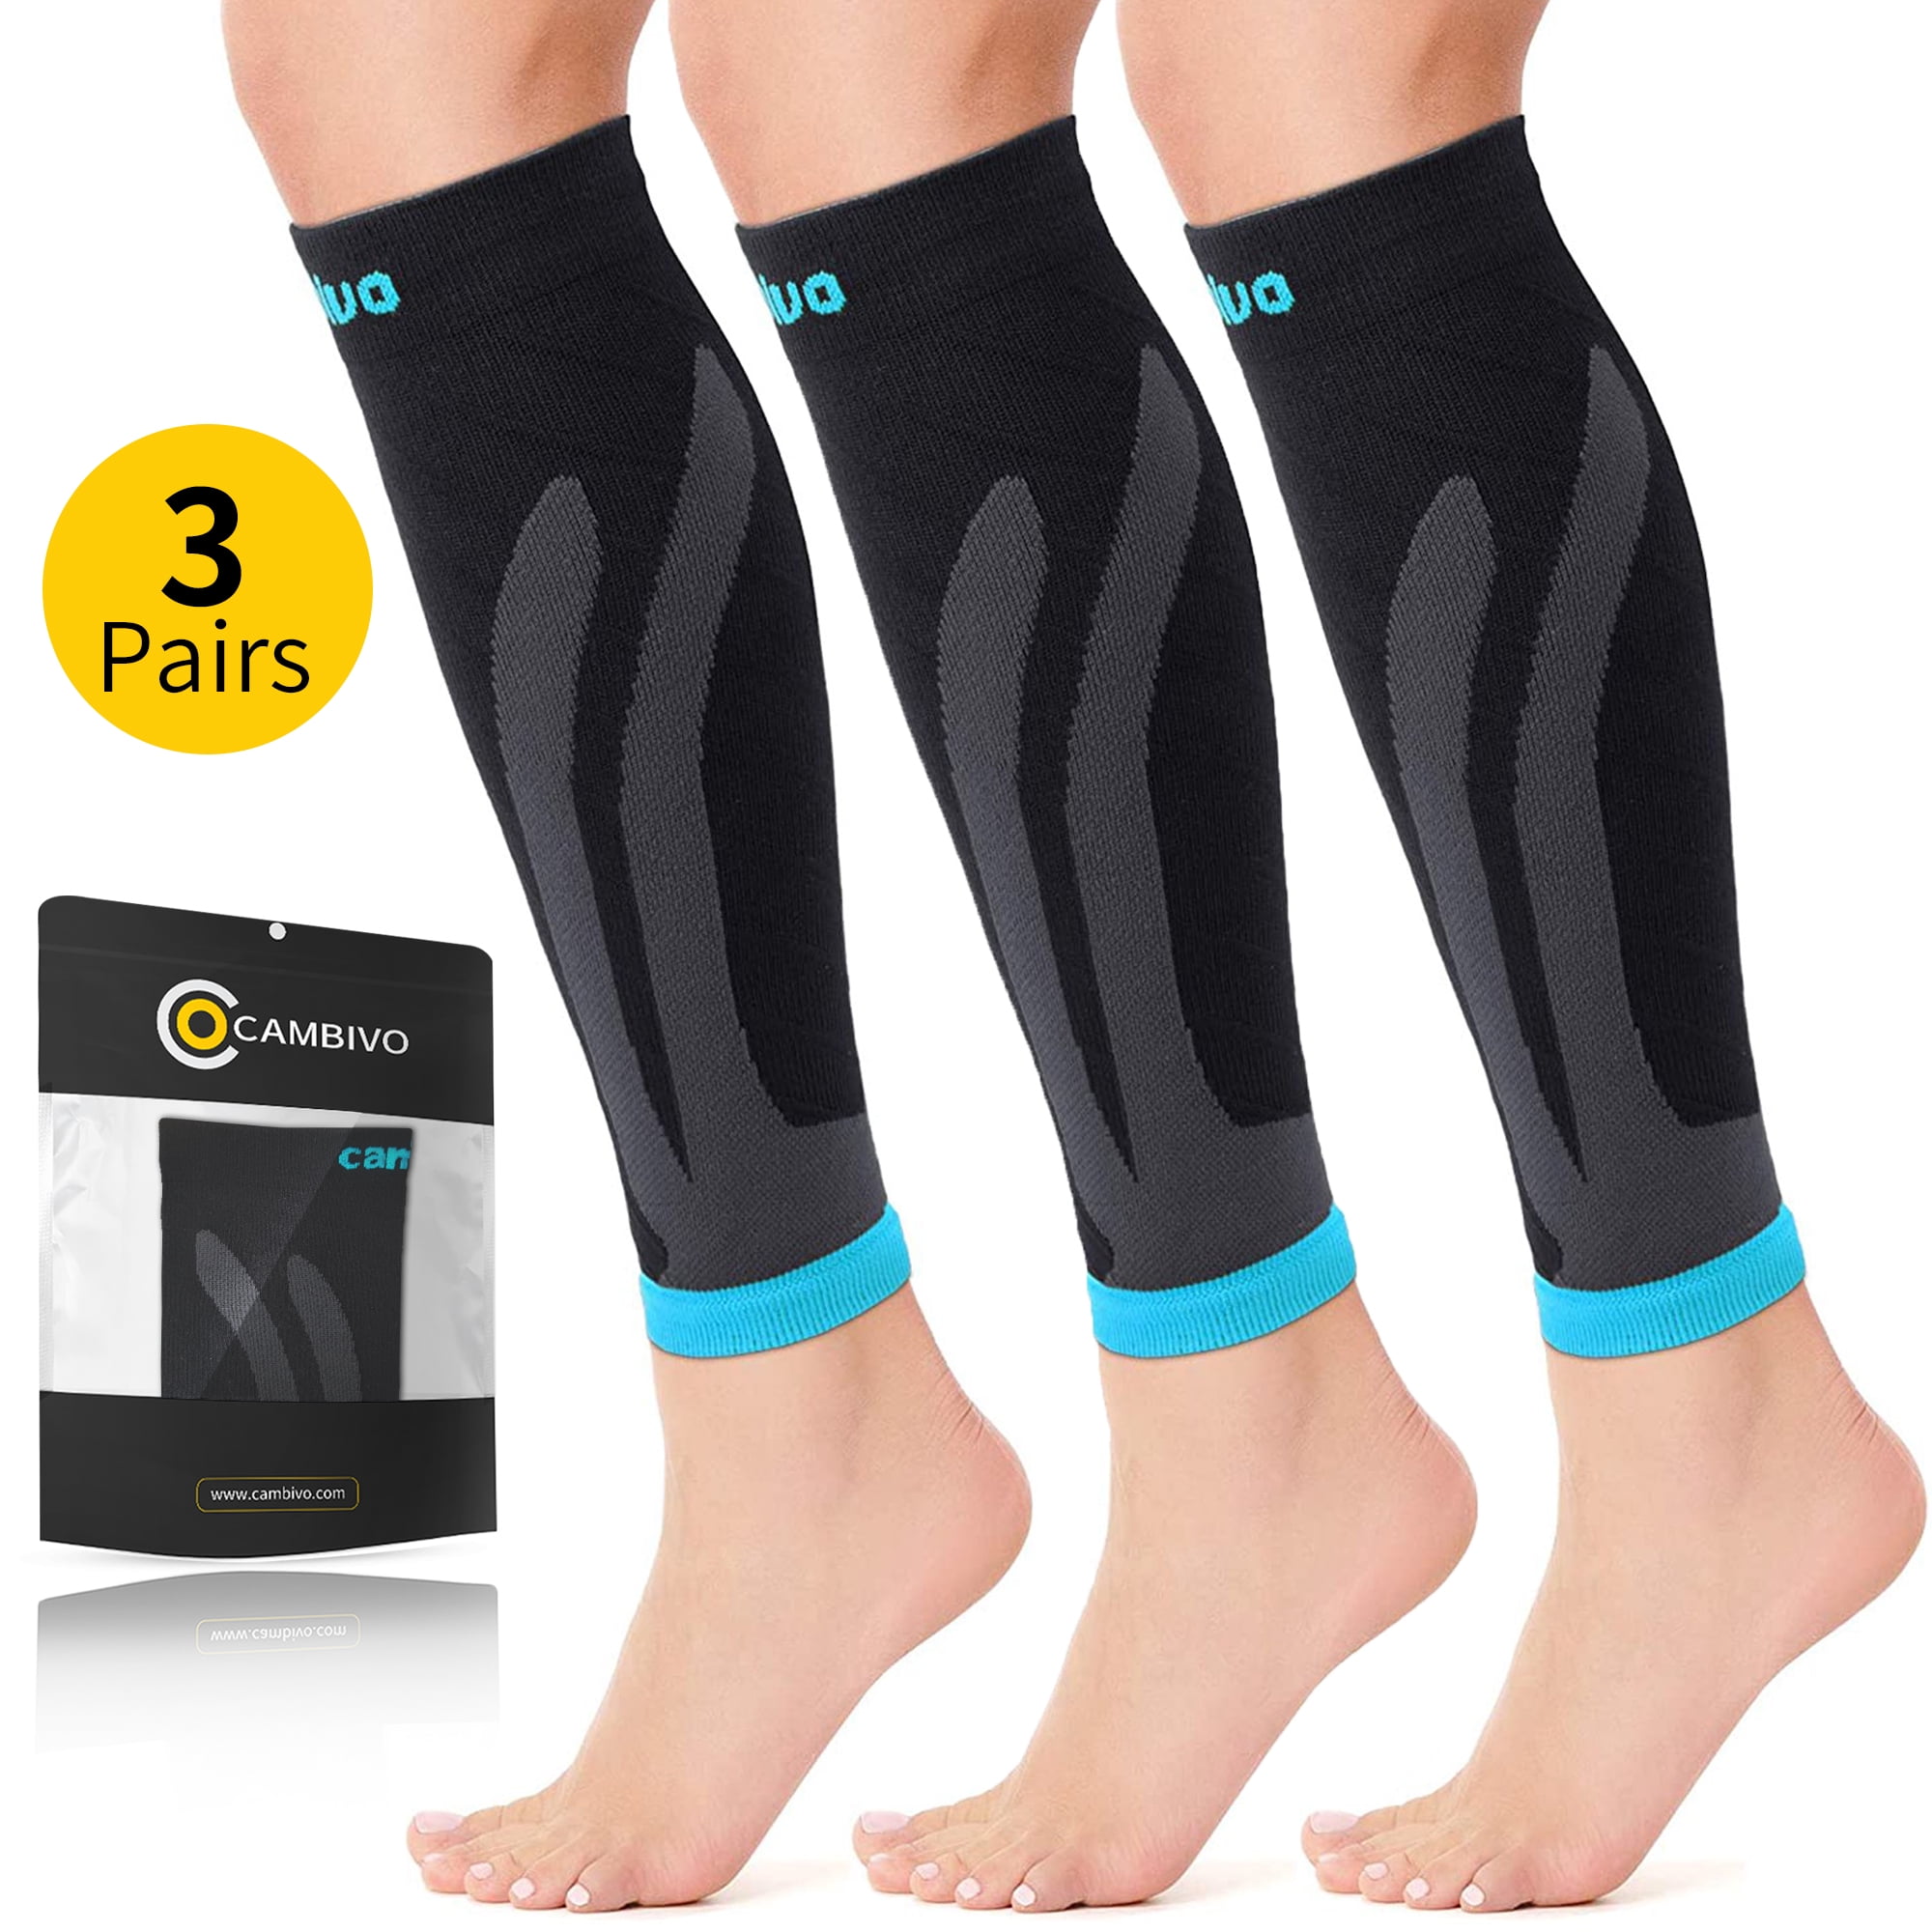 1 Pair New Style Dinosaur Pattern Calf Compression Sleeves Leg Compression Socks for Calves Running Men Women Youth Best for Shin Splint Muscle Pain 